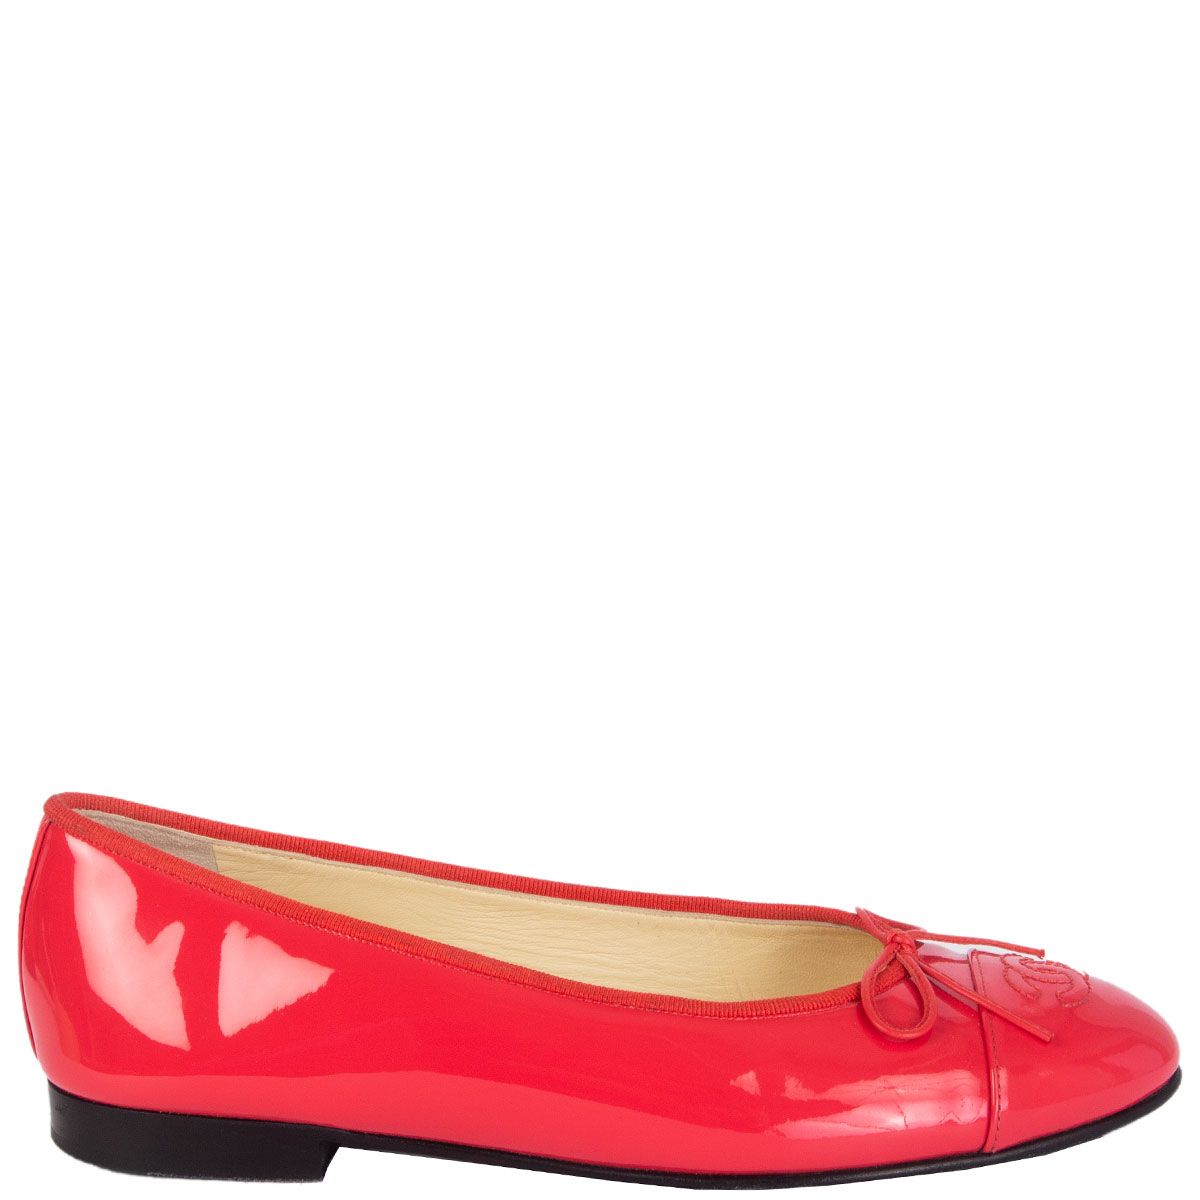 Chanel Patent Leather Flats Pink